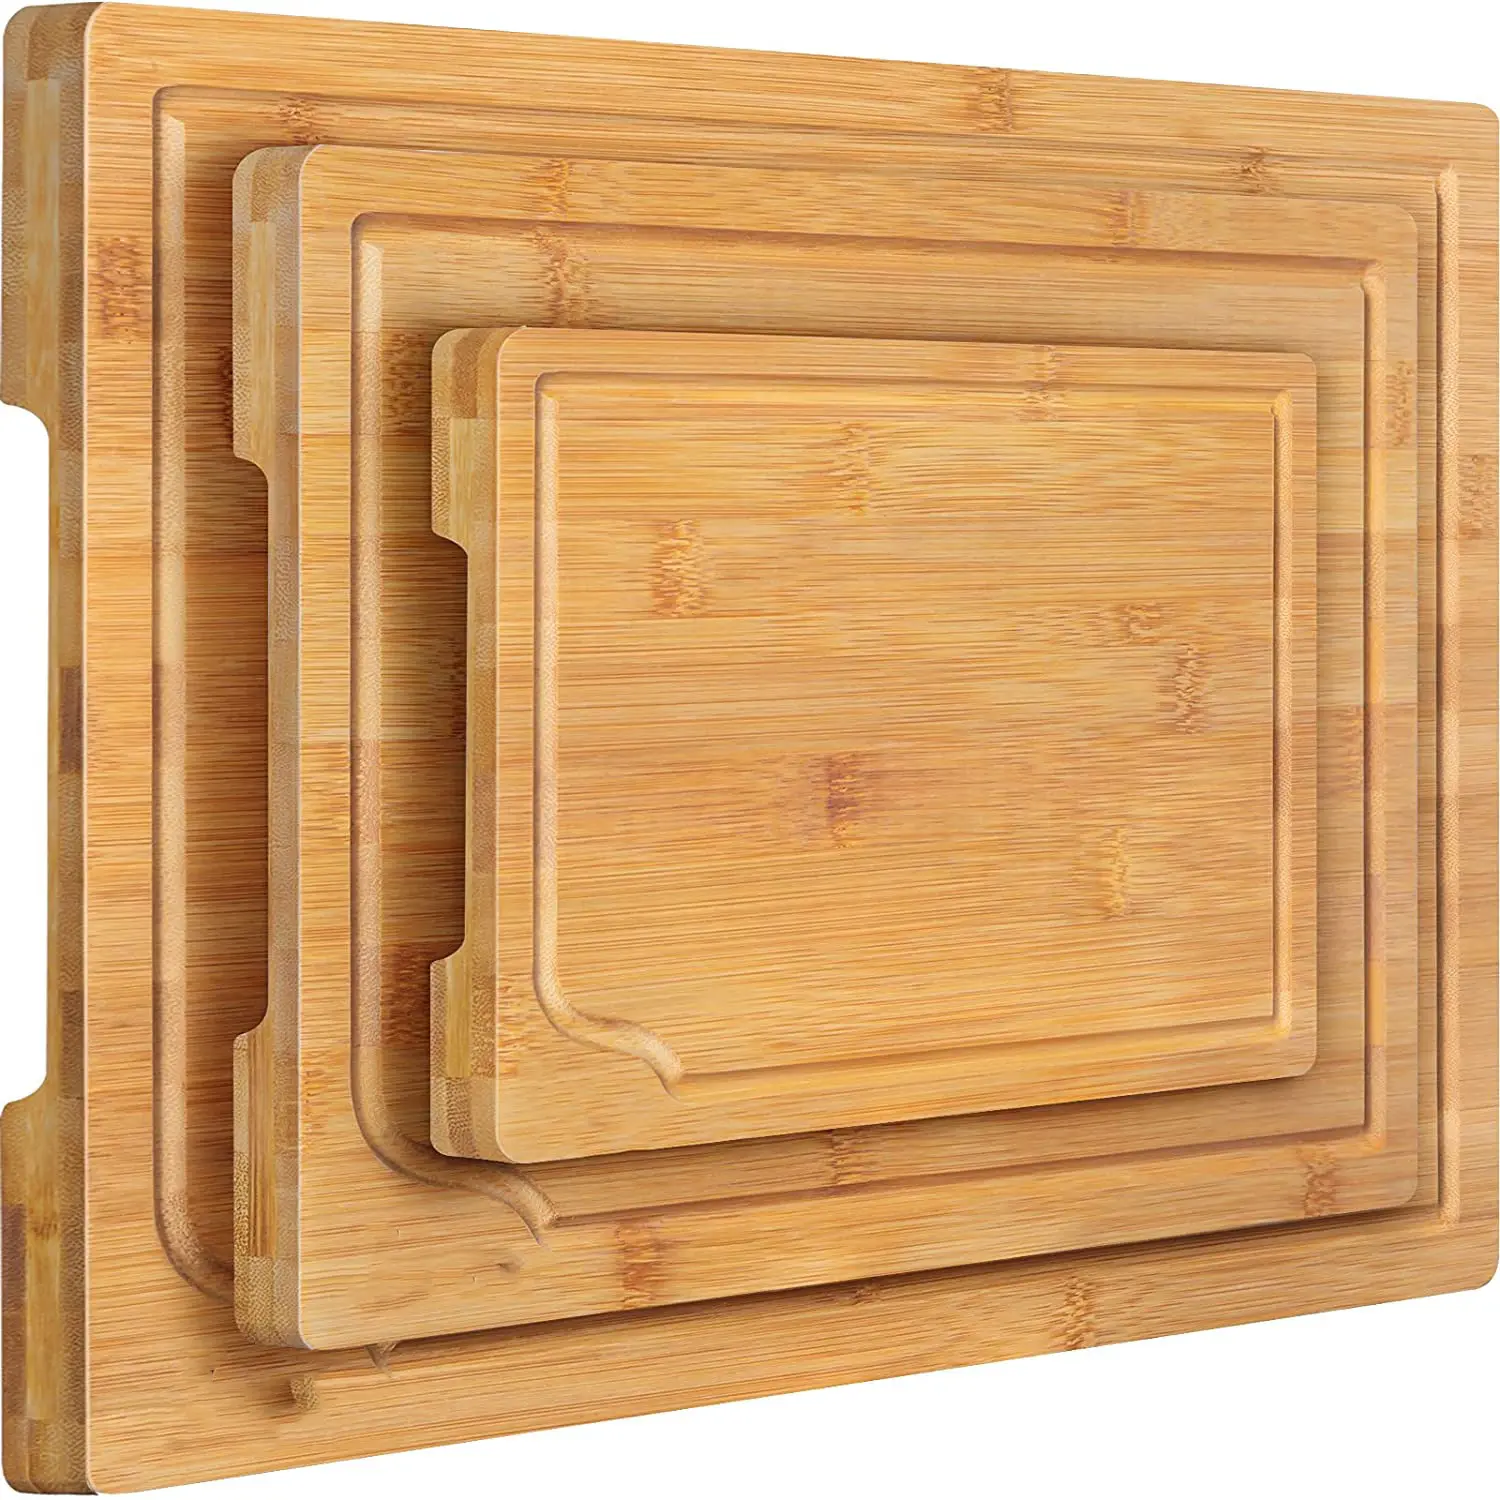 Organic Bamboo 3-piece Bamboo Cutting Board with Juice Groove and Handles Set of 3 Kitchen Board for Vegetable and Fruit